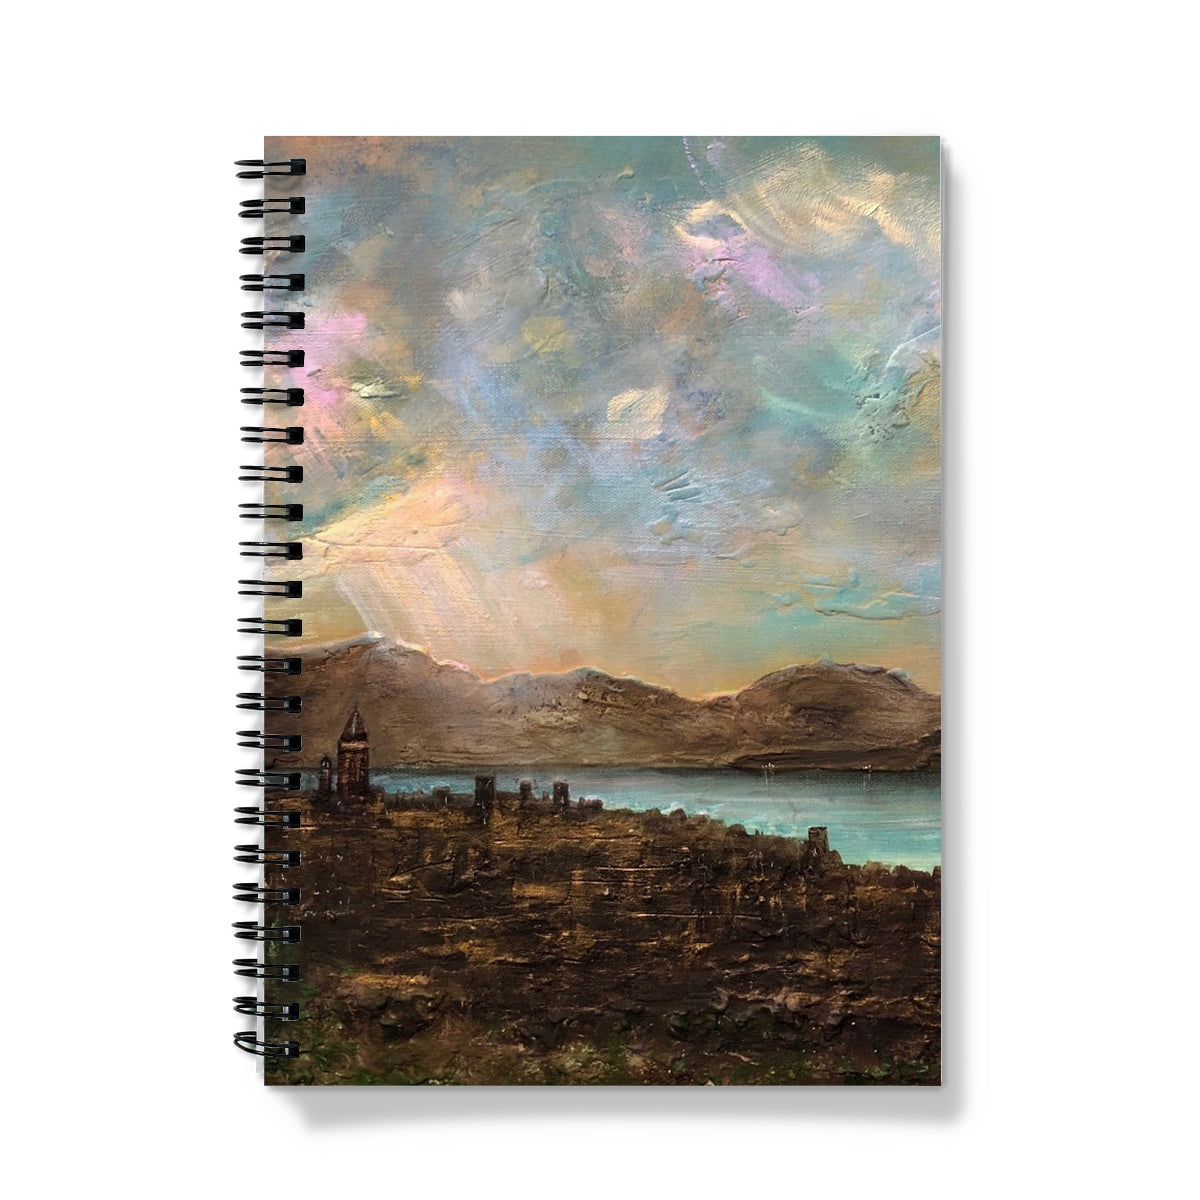 Angels Fingers Over Greenock Art Gifts Notebook-Journals & Notebooks-River Clyde Art Gallery-A5-Graph-Paintings, Prints, Homeware, Art Gifts From Scotland By Scottish Artist Kevin Hunter